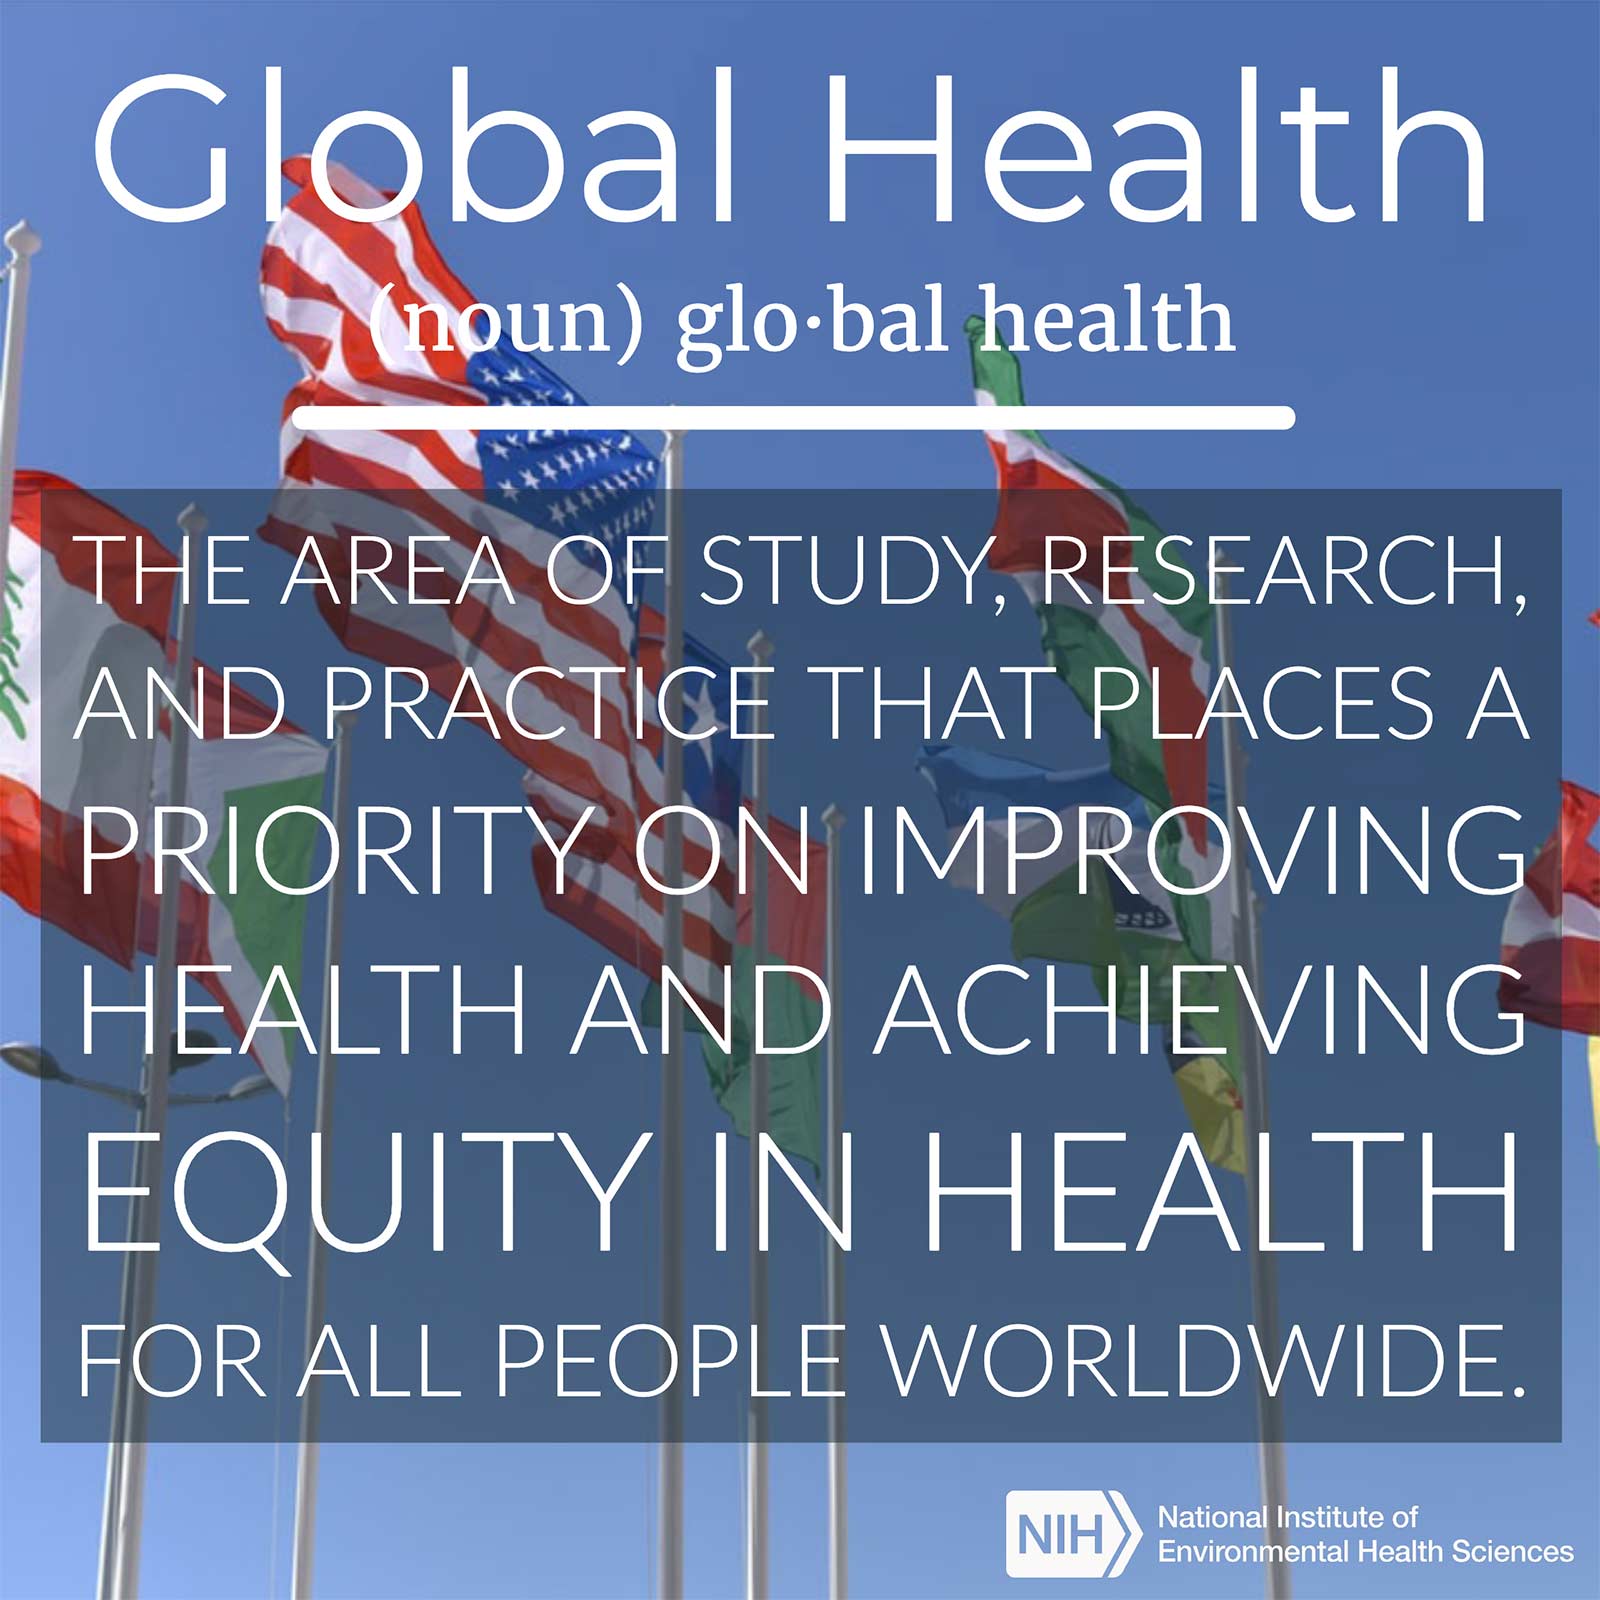 Global Health (noun) defined as "The area of study, research, and practice that places a priority on improving health and achieving equity in health for all people worldwide."